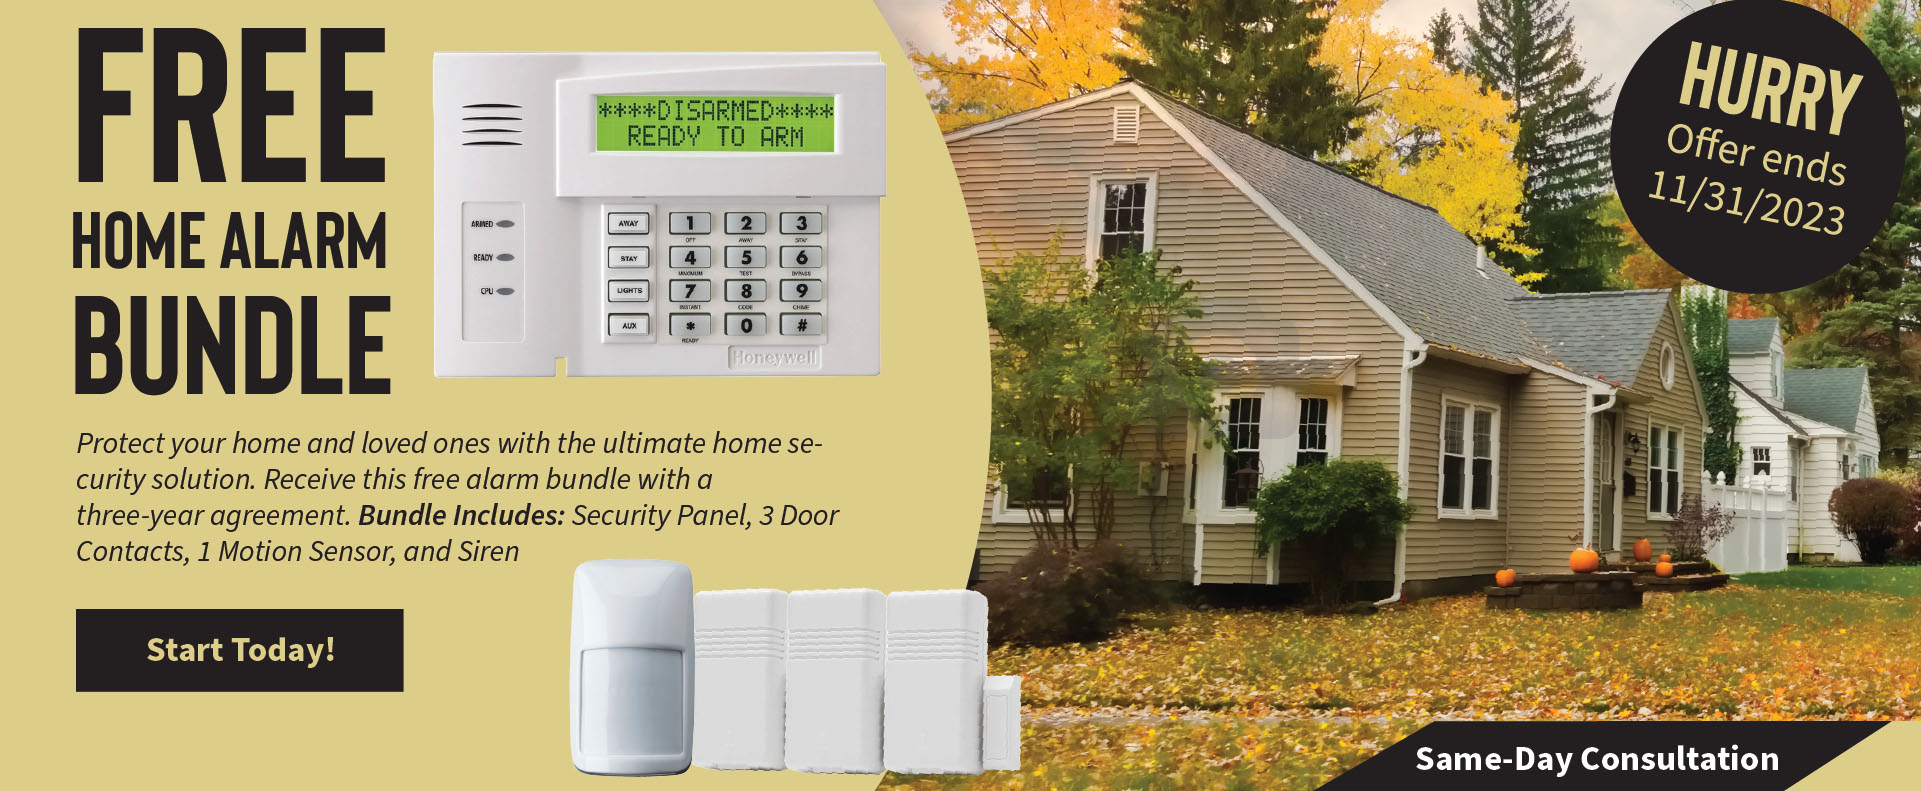 Free Home Alarm Bundle - Hurry Offer Ends 11/30/2023